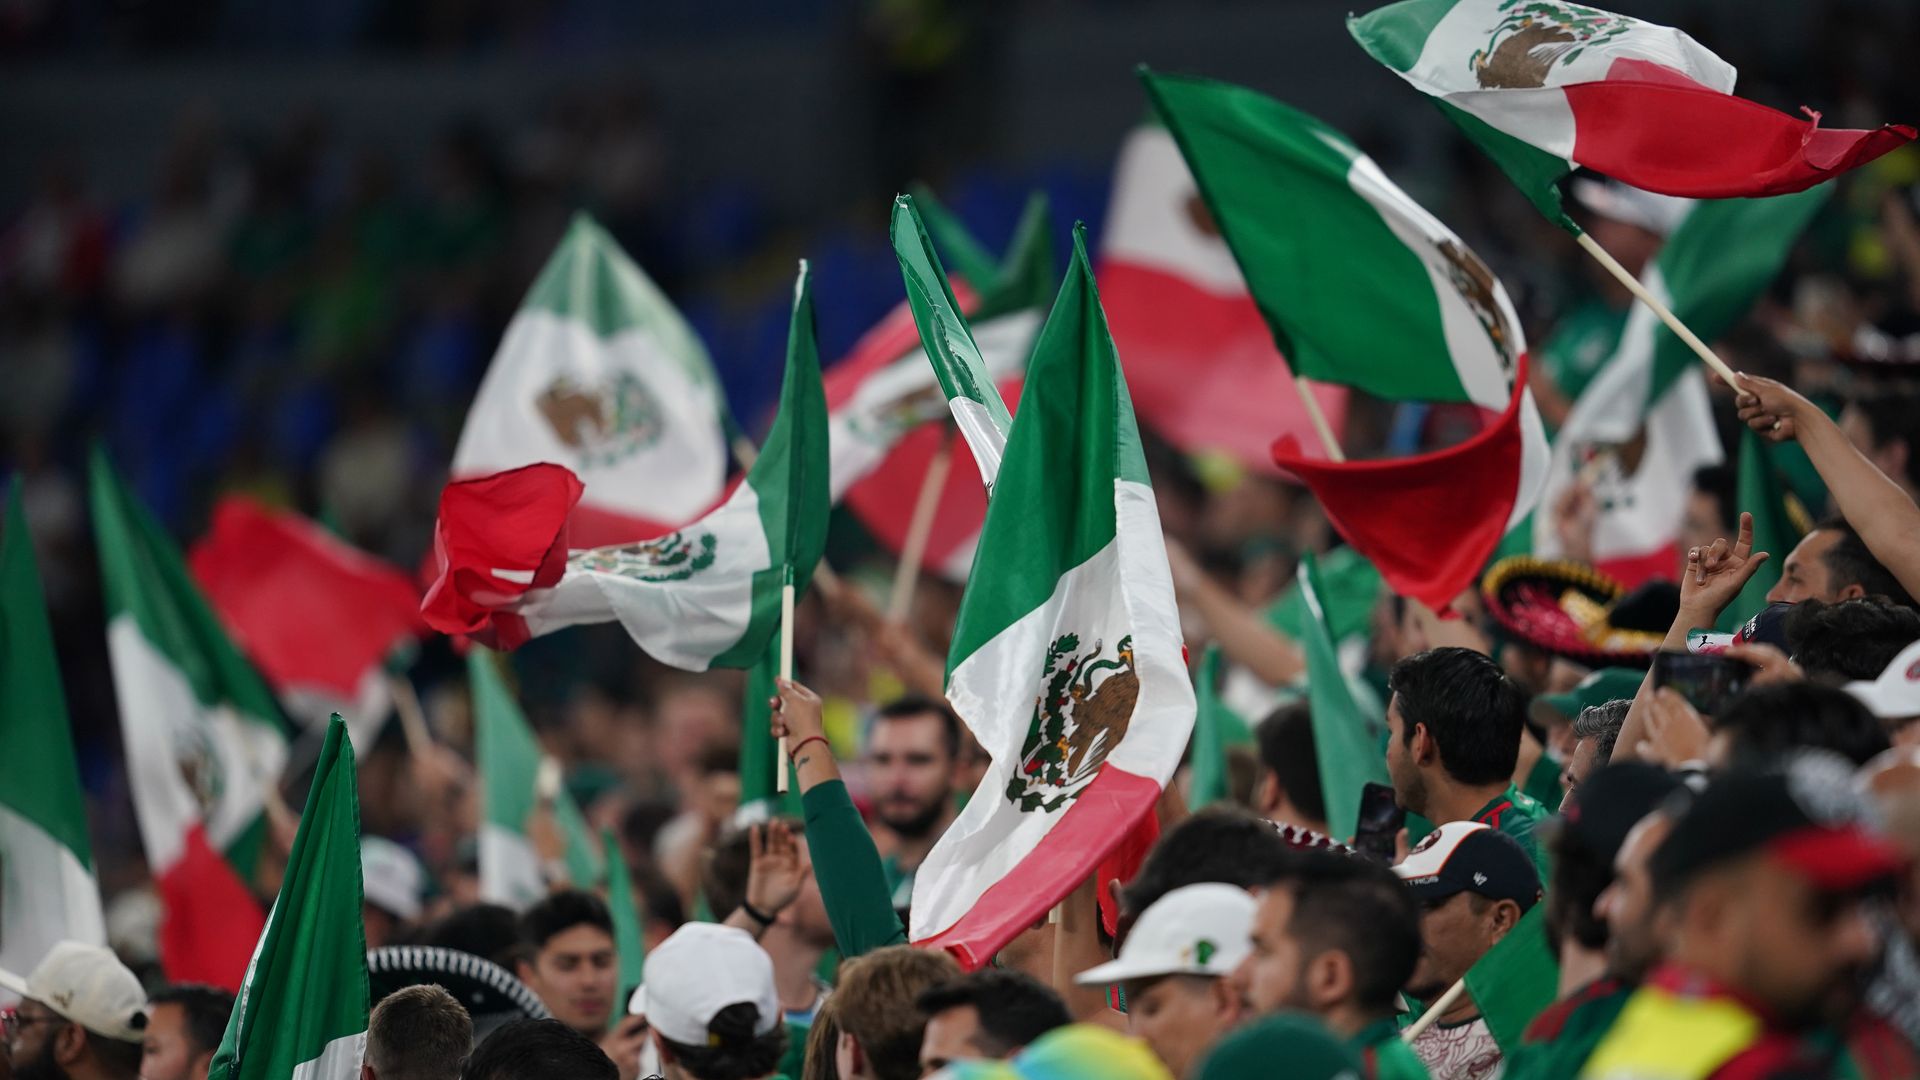 Fans of Team Mexico with flags during the FIFA World Cup Qatar 2022 group C match between Mexico and Poland